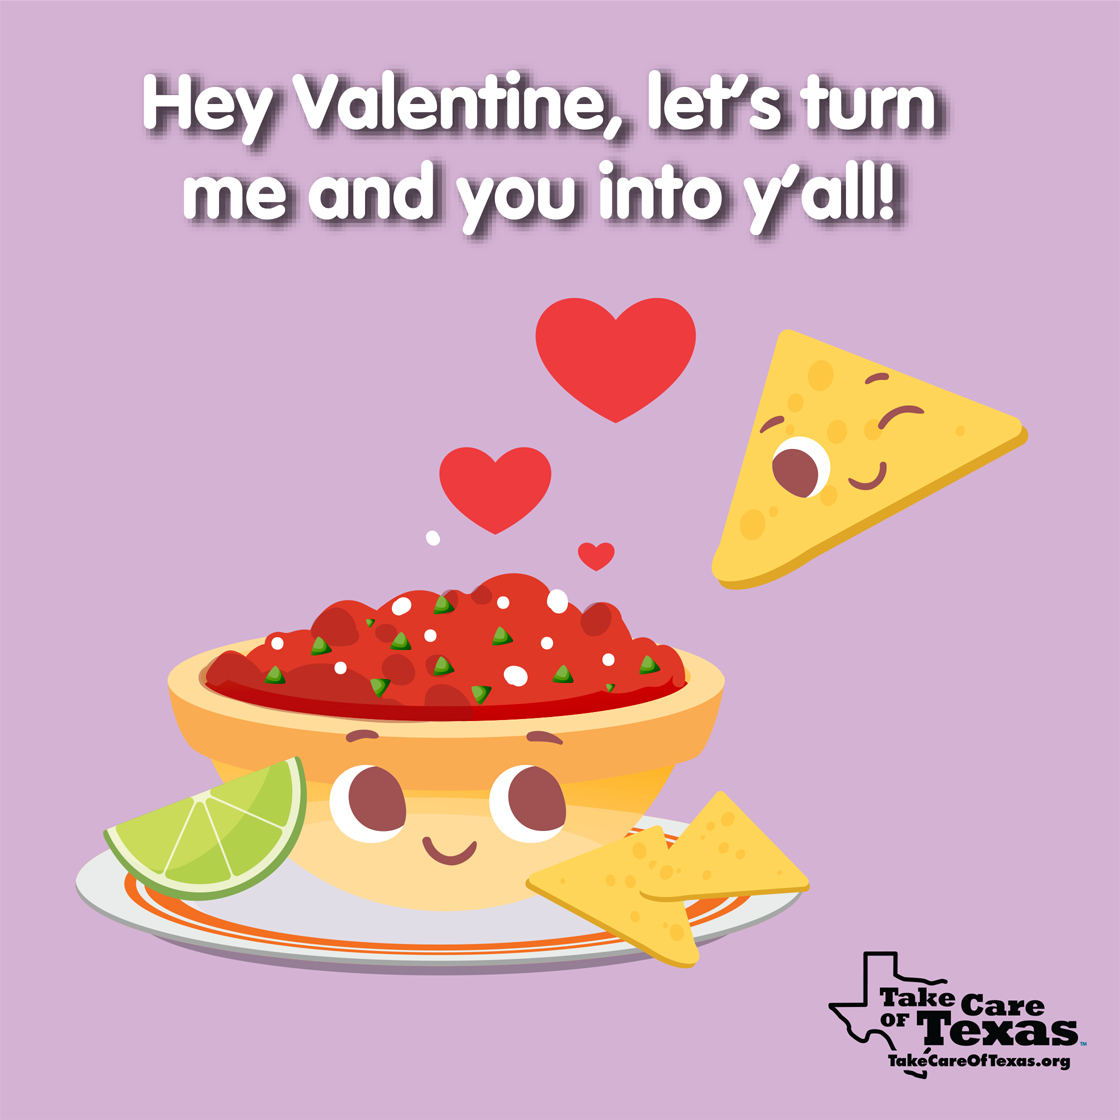 Chips and Salsa with the text "Hey Valentine, let's turn me and you into y'all"